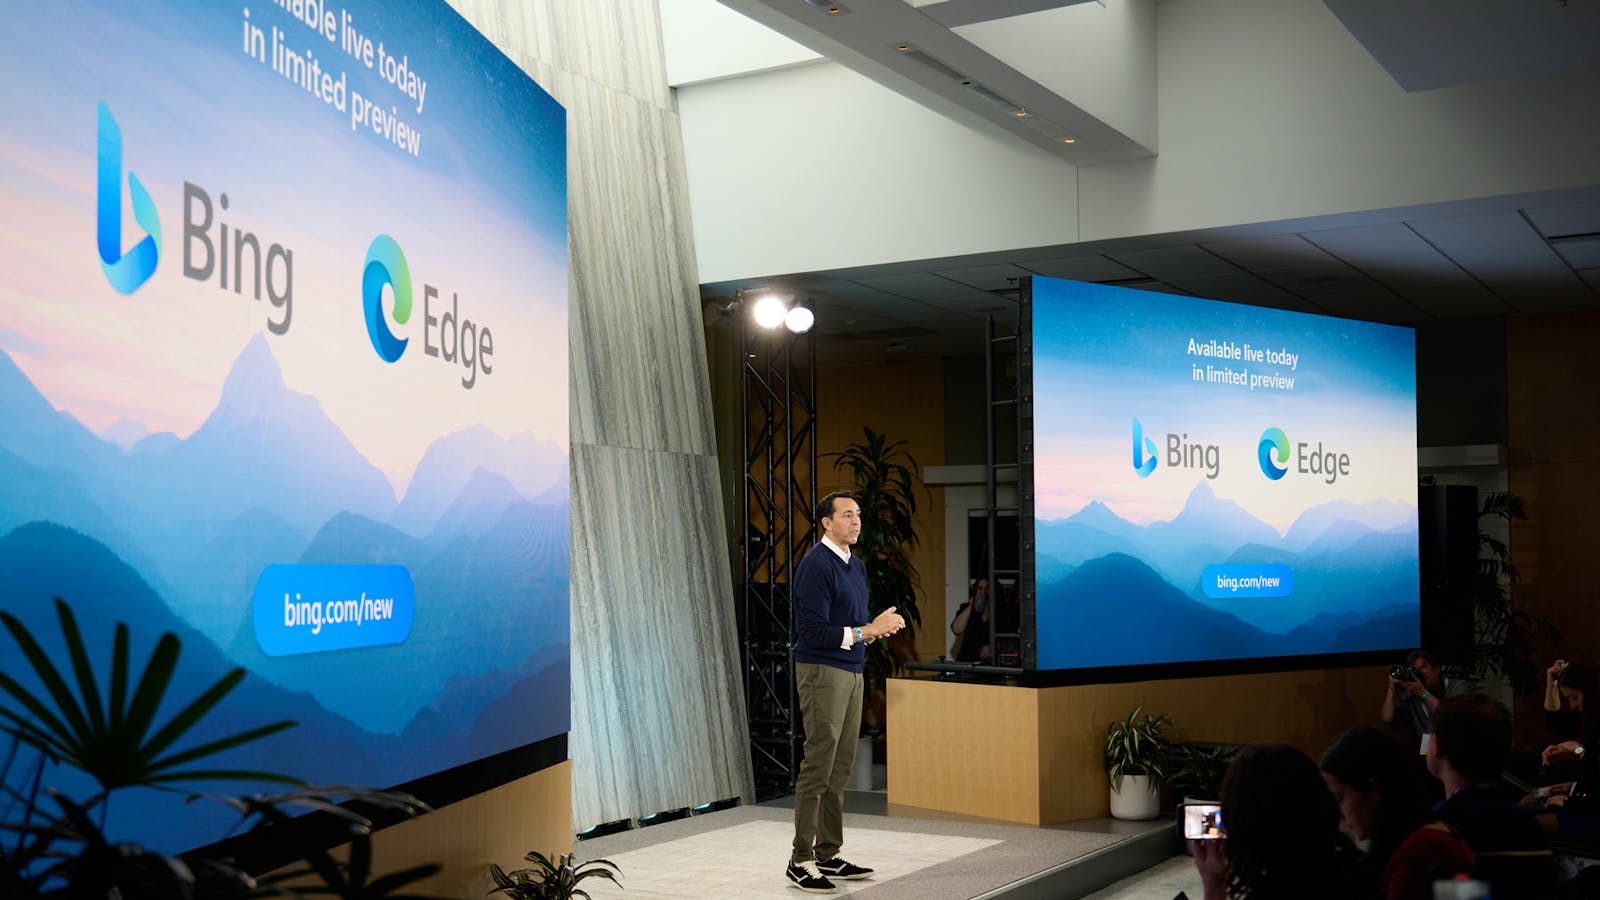 Yusuf Mehdi, Microsoft Consumer Chief Marketing Officer, at the Bing chatbot launch in February. Photo by Getty